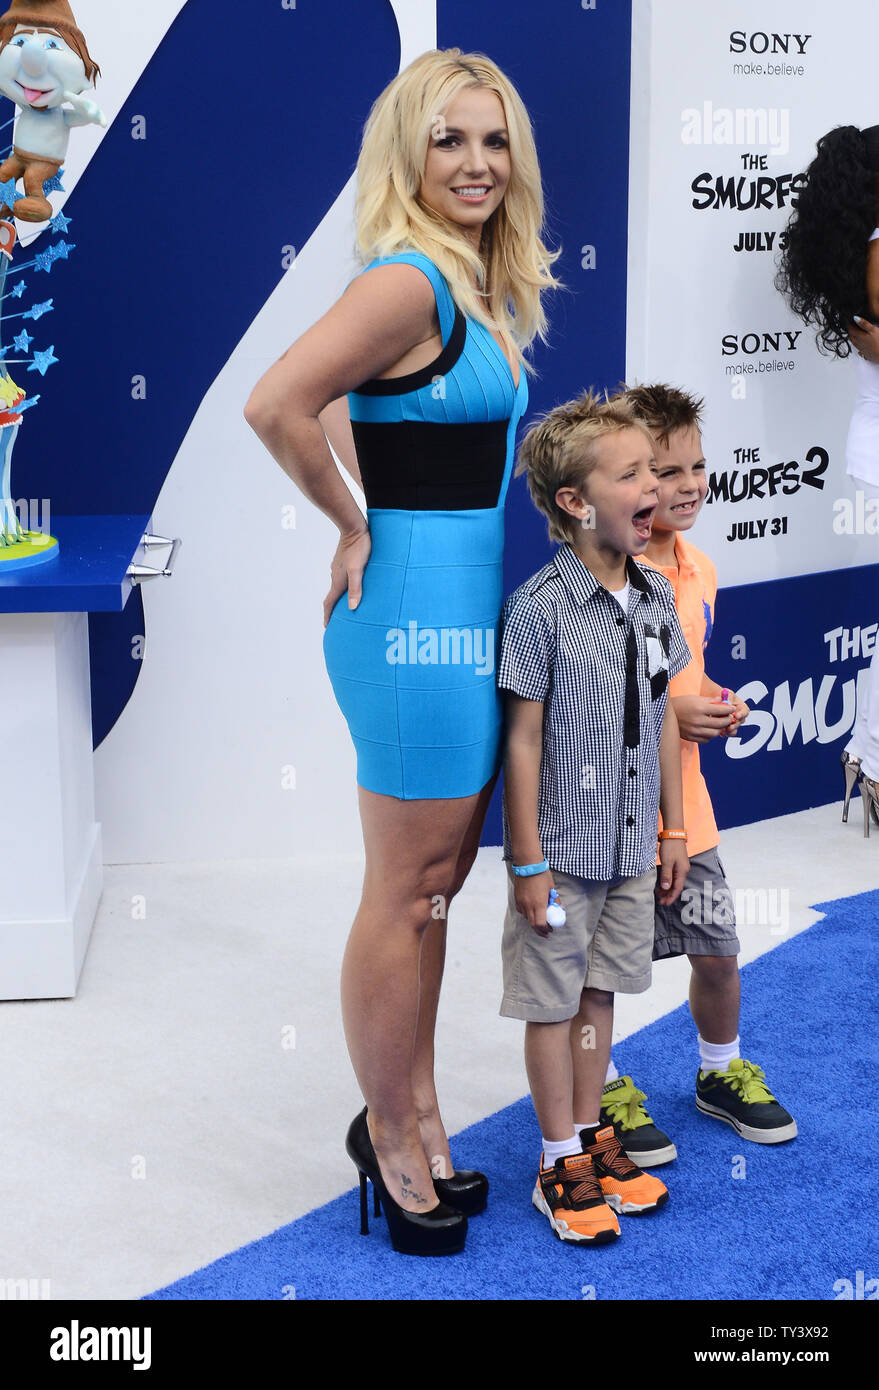 Singer Britney Spears, who performs 'Ooh La La' in the motion picture animated comedy 'The Smurfs 2', attends the premiere of the film with sons  Sean Federline (L) and Jayden James Federline at the Regency Village Theatre, in the Westwood section of Los Angeles on July 28, 2013. The Smurfs join forces with their human friends to rescue Smurfette, who has been kidnapped by Gargamel since she knows a secret spell that can turn the evil sorcerer's newest creation - creatures called the Naughties - into real Smurfs.  UPI/Jim Ruymen Stock Photo